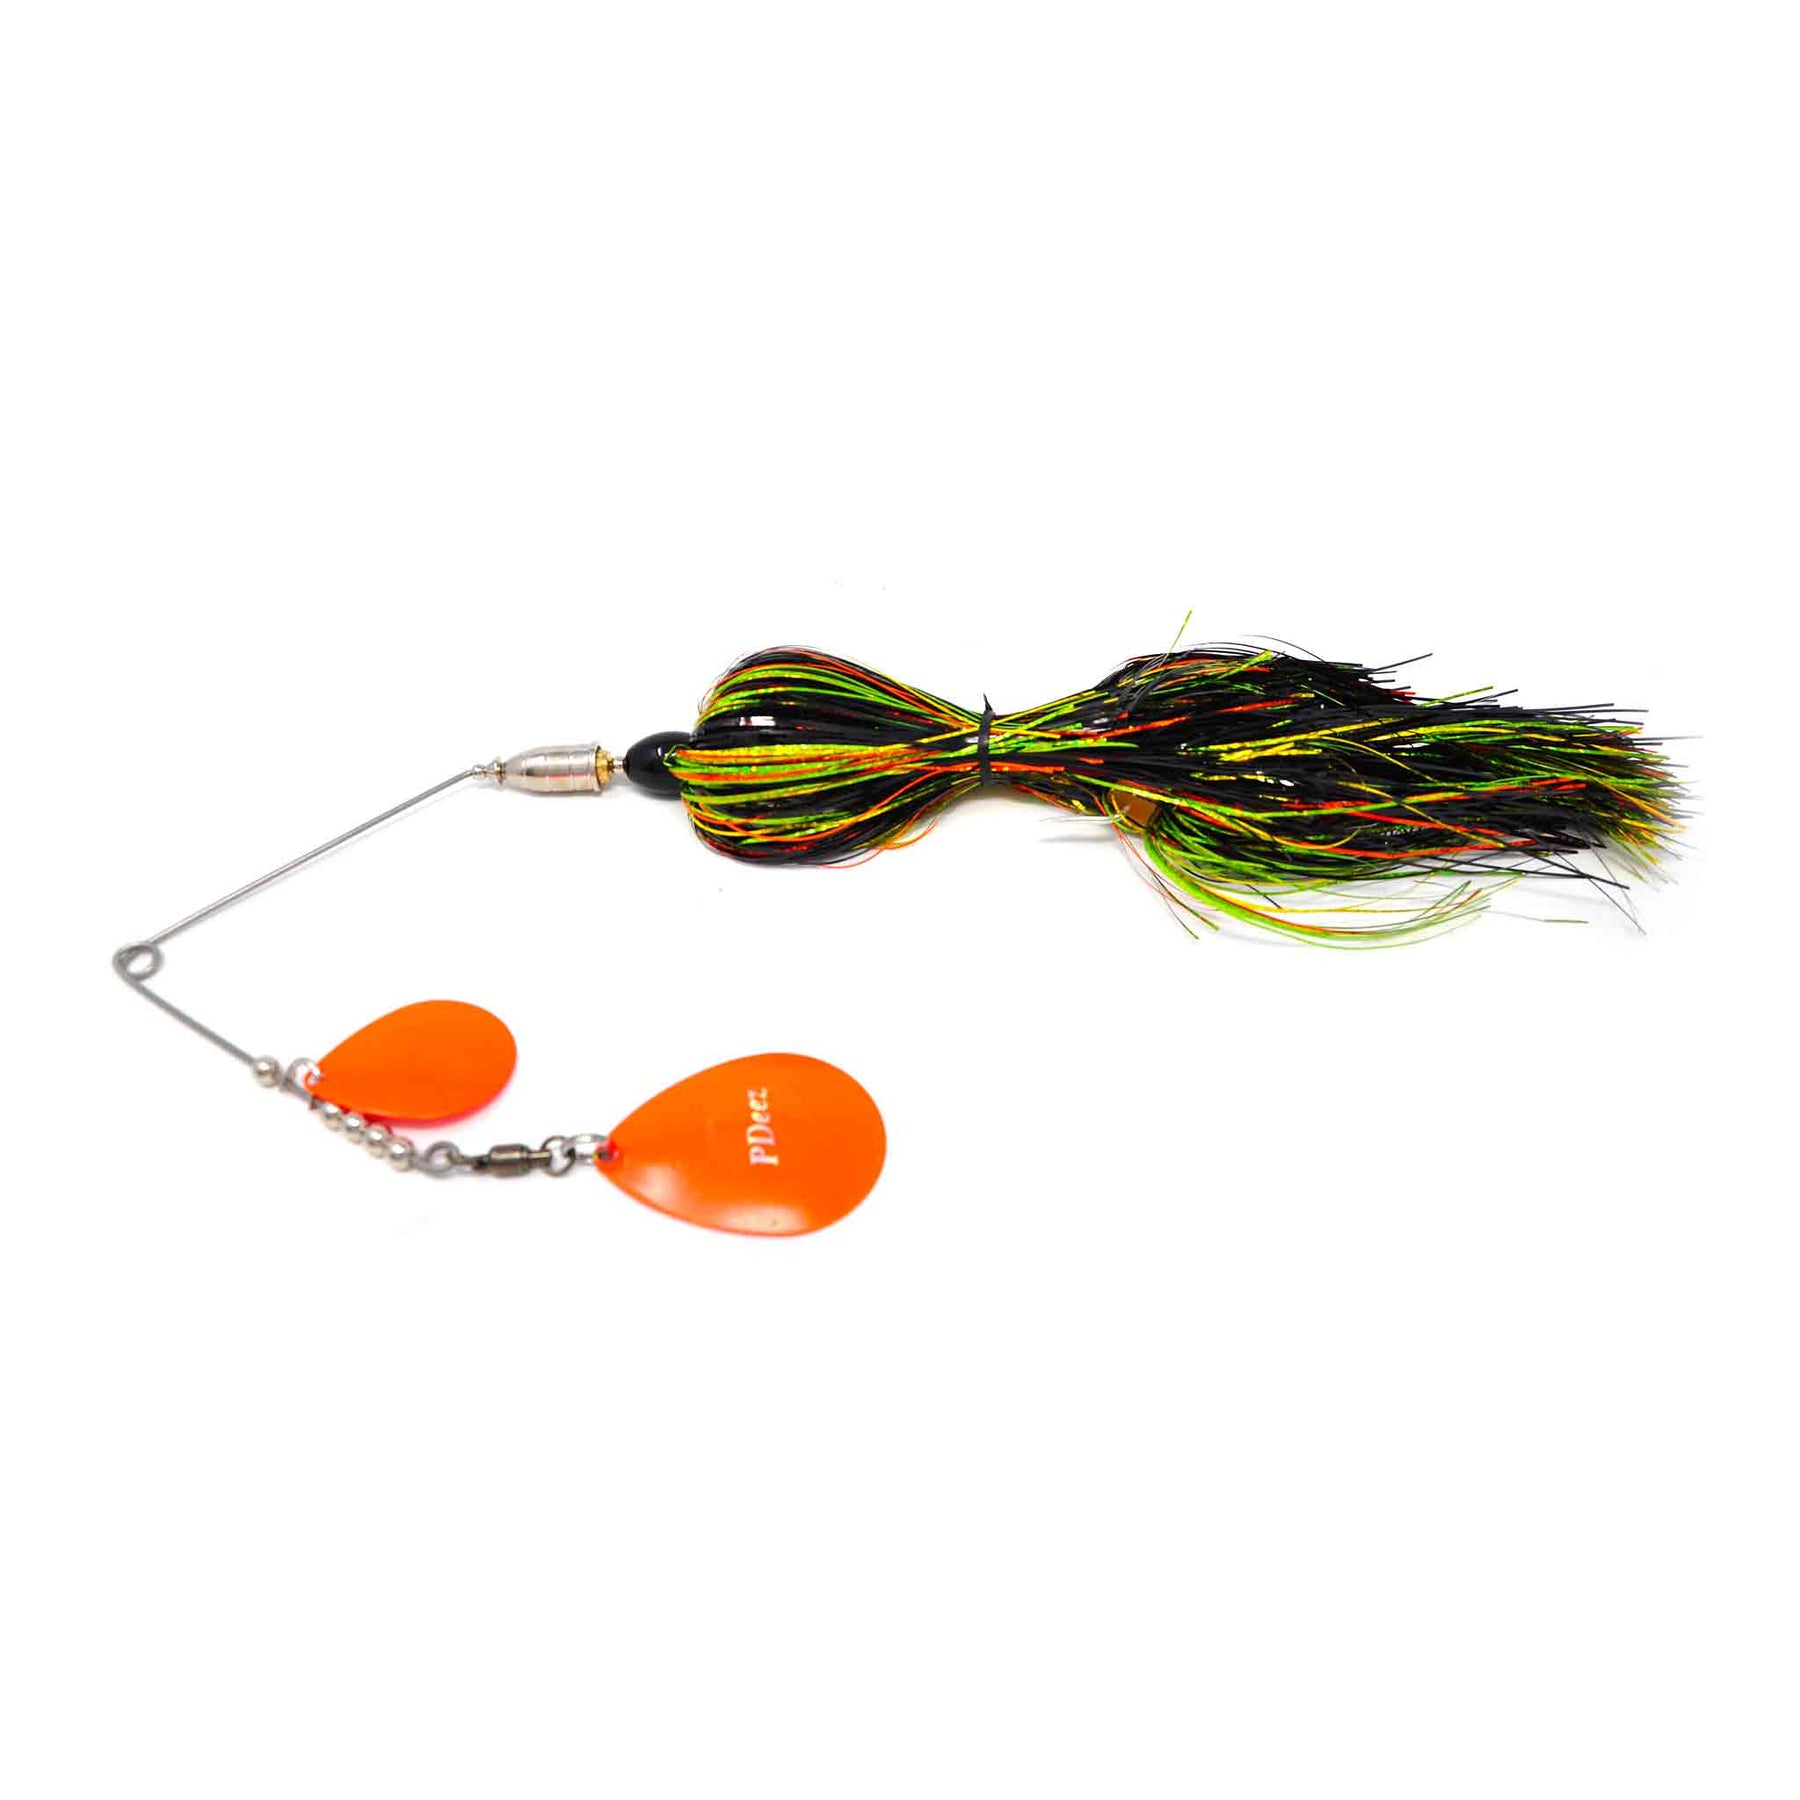 View of Spinnerbaits PDeez Bell Casting Spinnerbait Black Perch available at EZOKO Pike and Musky Shop